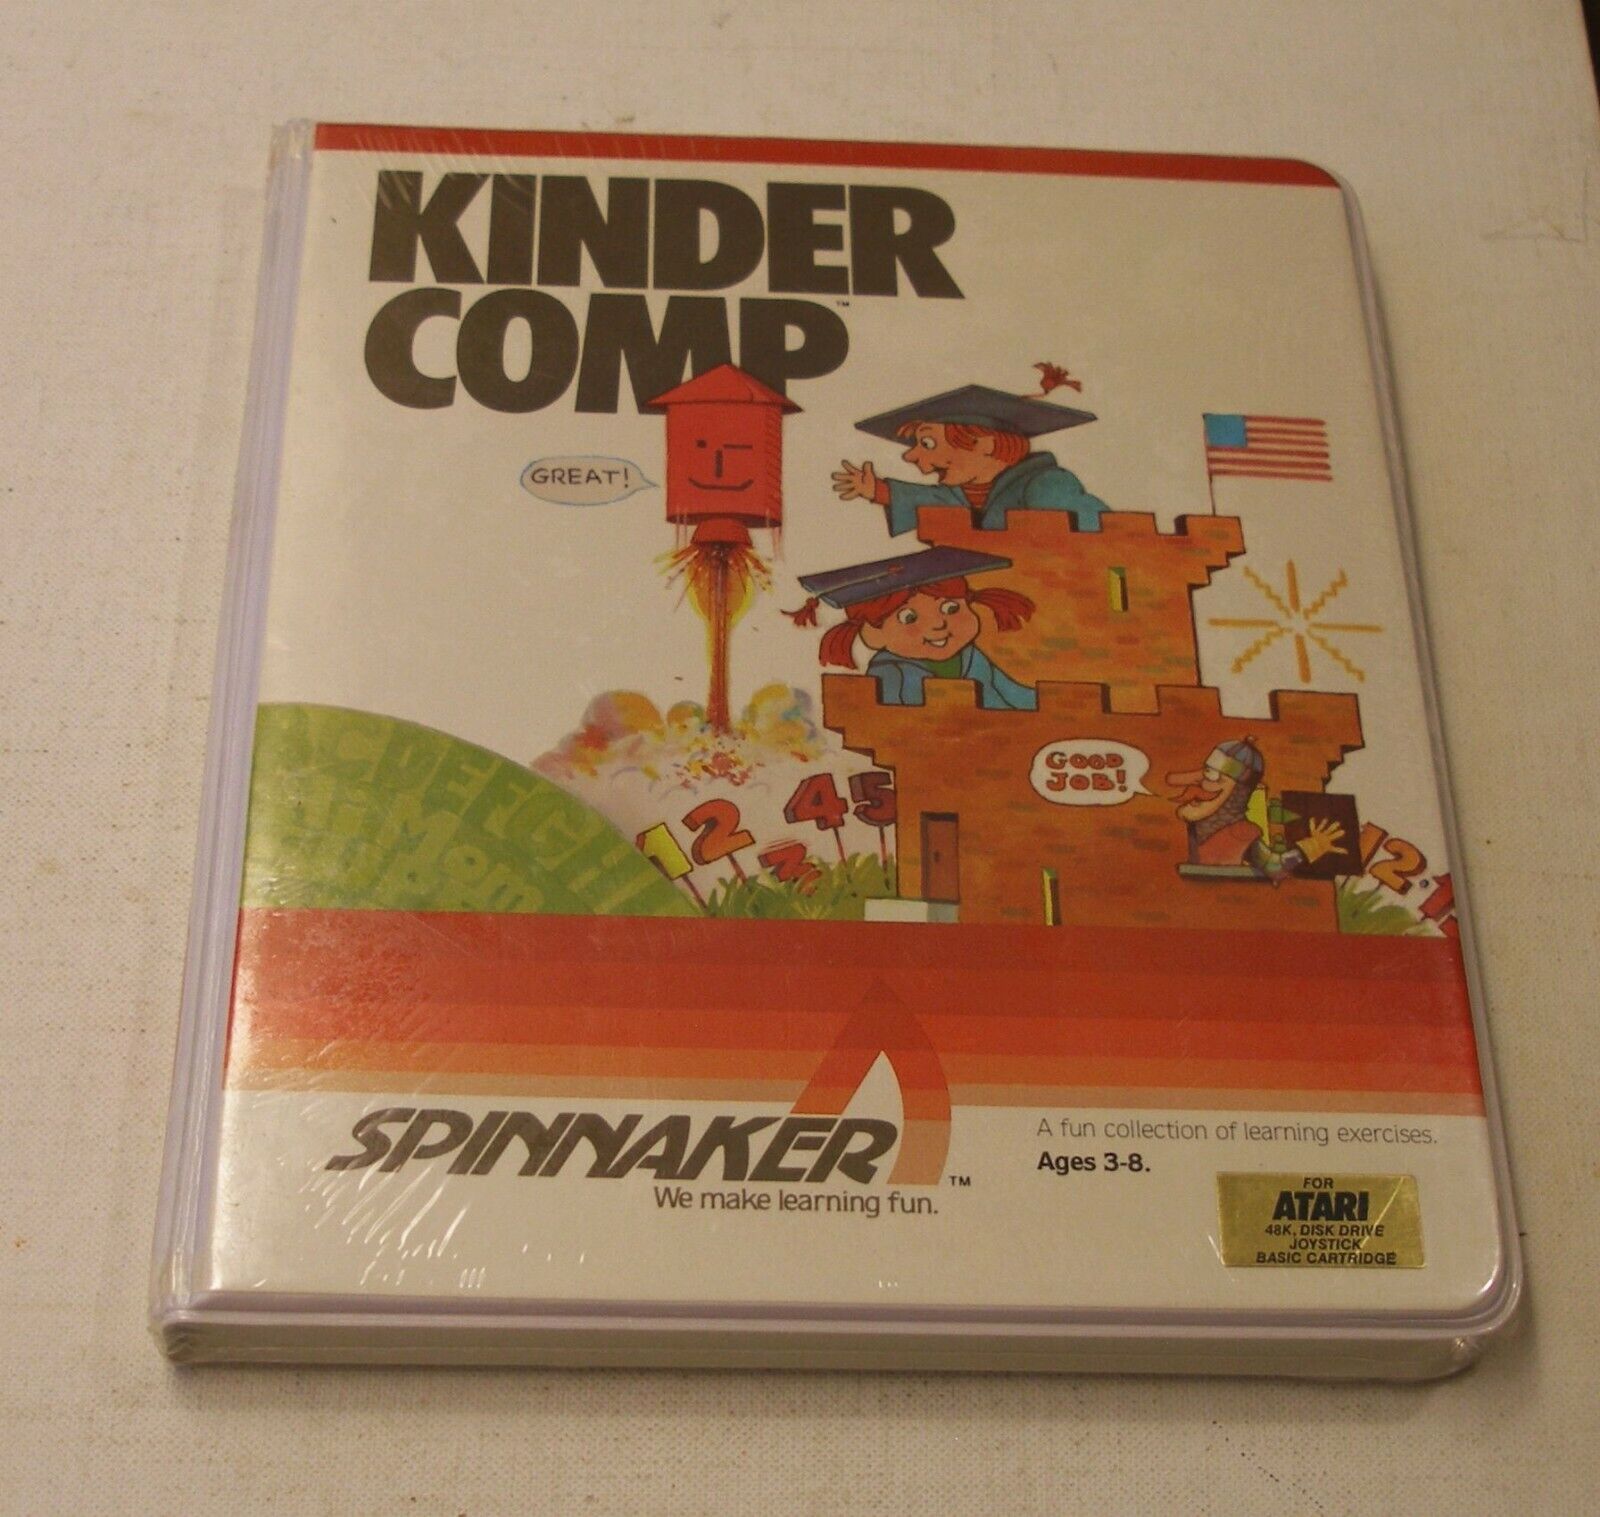 KinderComp by Spinnaker Software for Atari 400/800 - NEW